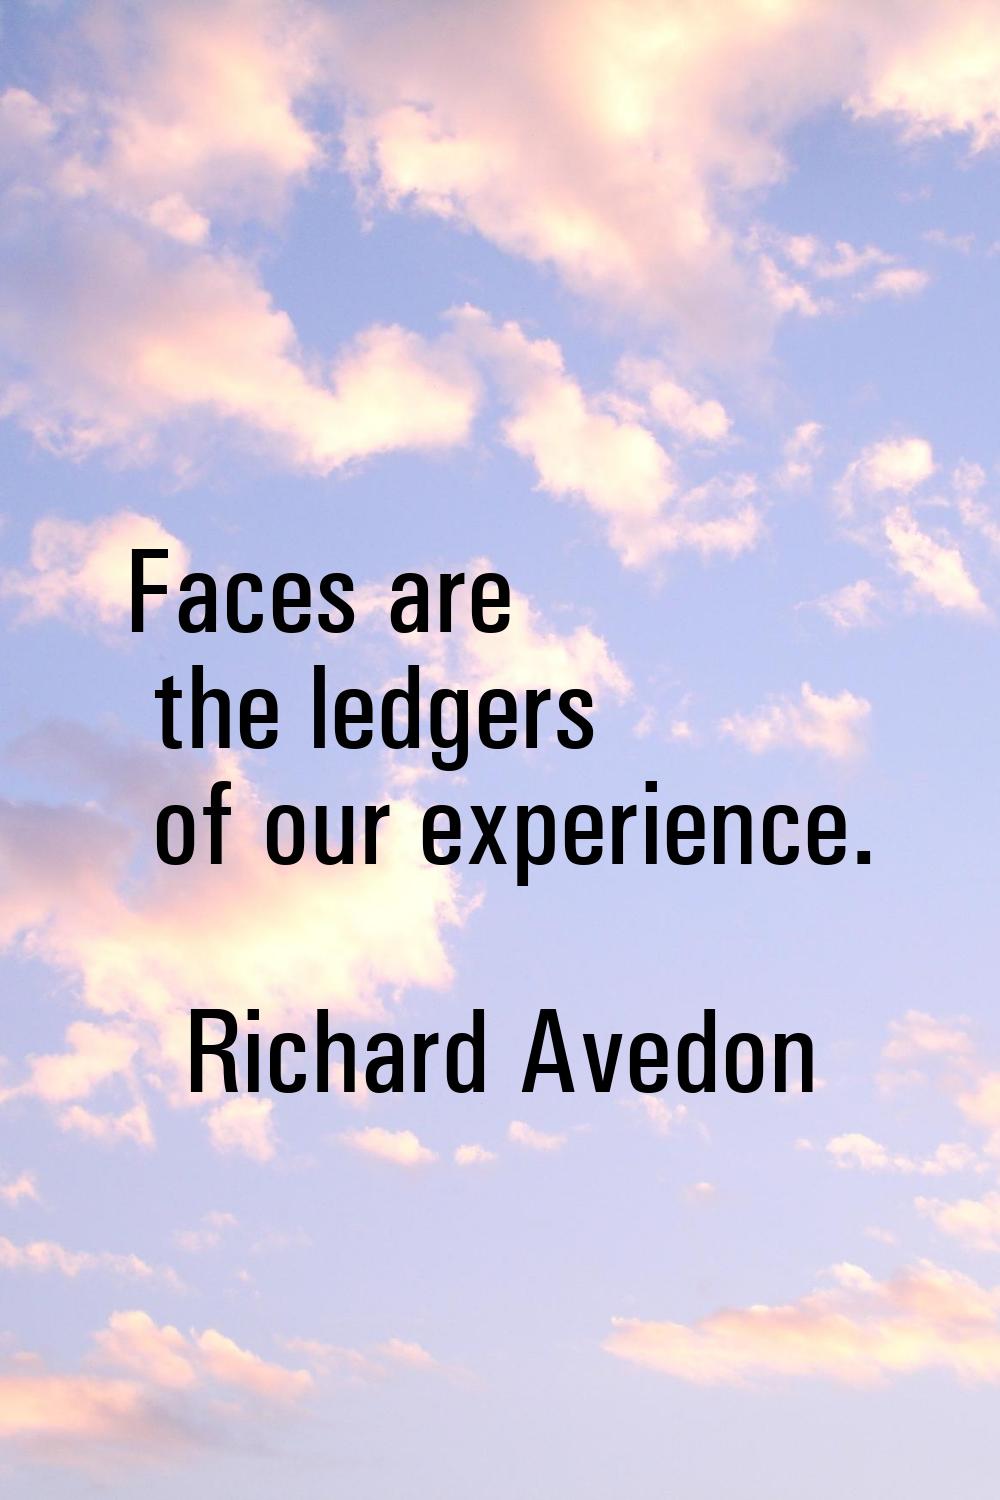 Faces are the ledgers of our experience.